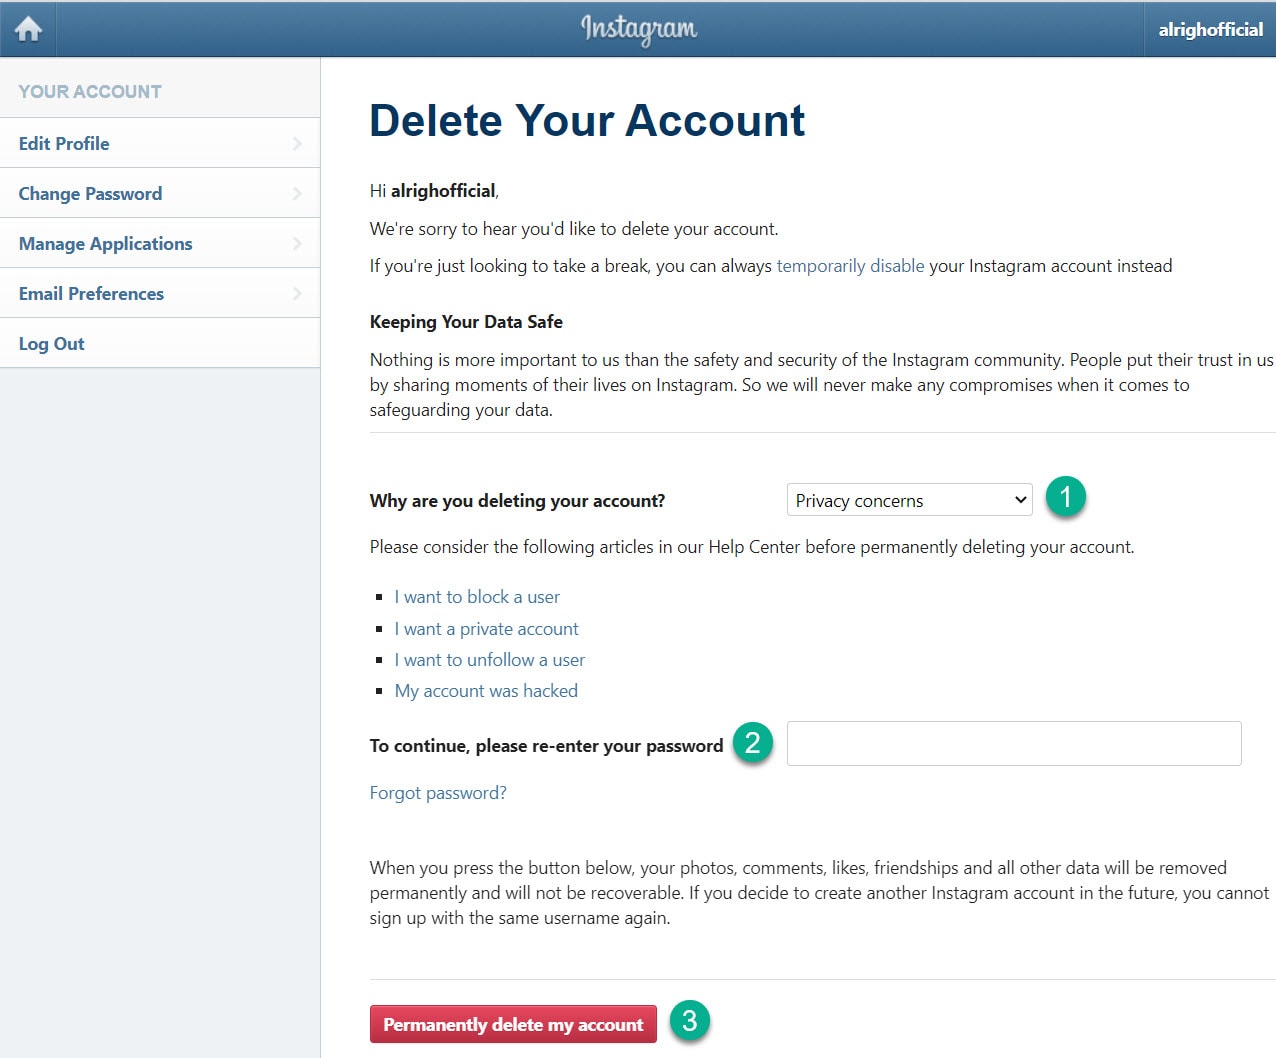 How to Delete Instagram Account Permanently or Temporarily?